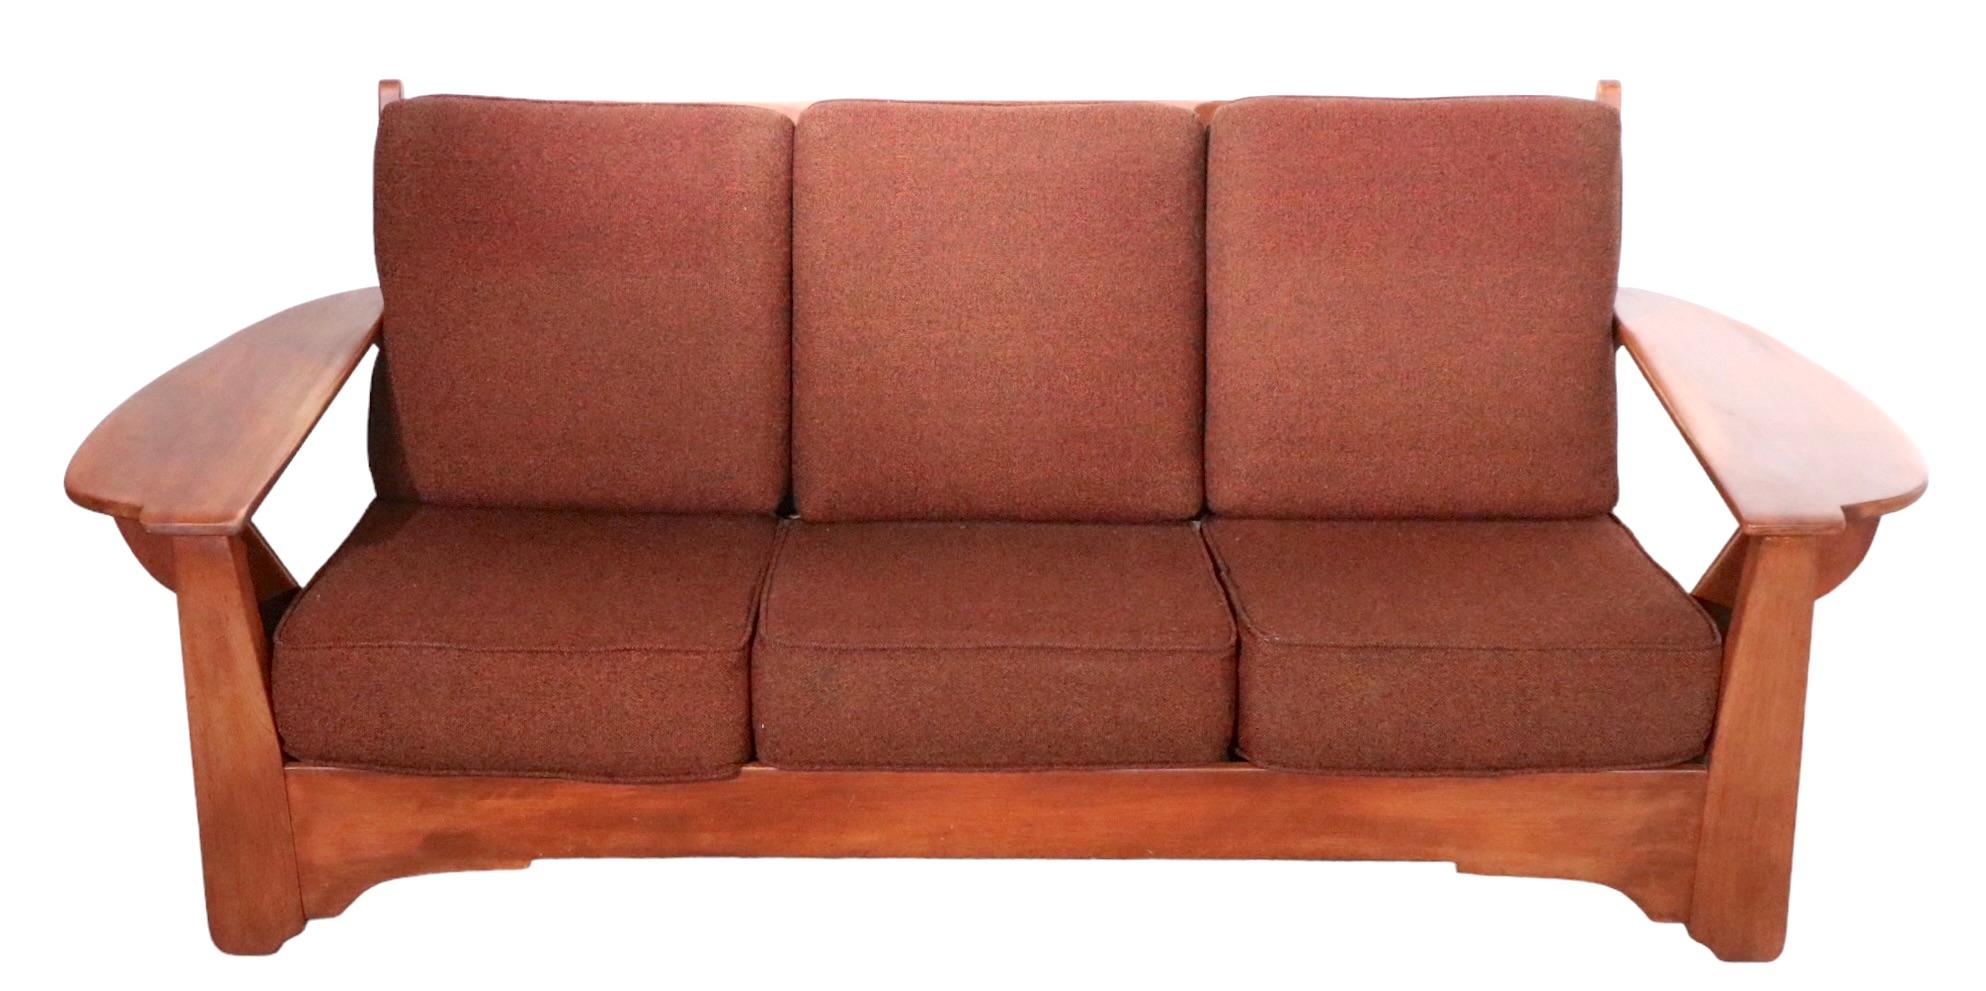 Paddle Arm Cushman Colonial Creations Sofa designed by Herman de Vries 1940s/50s 10